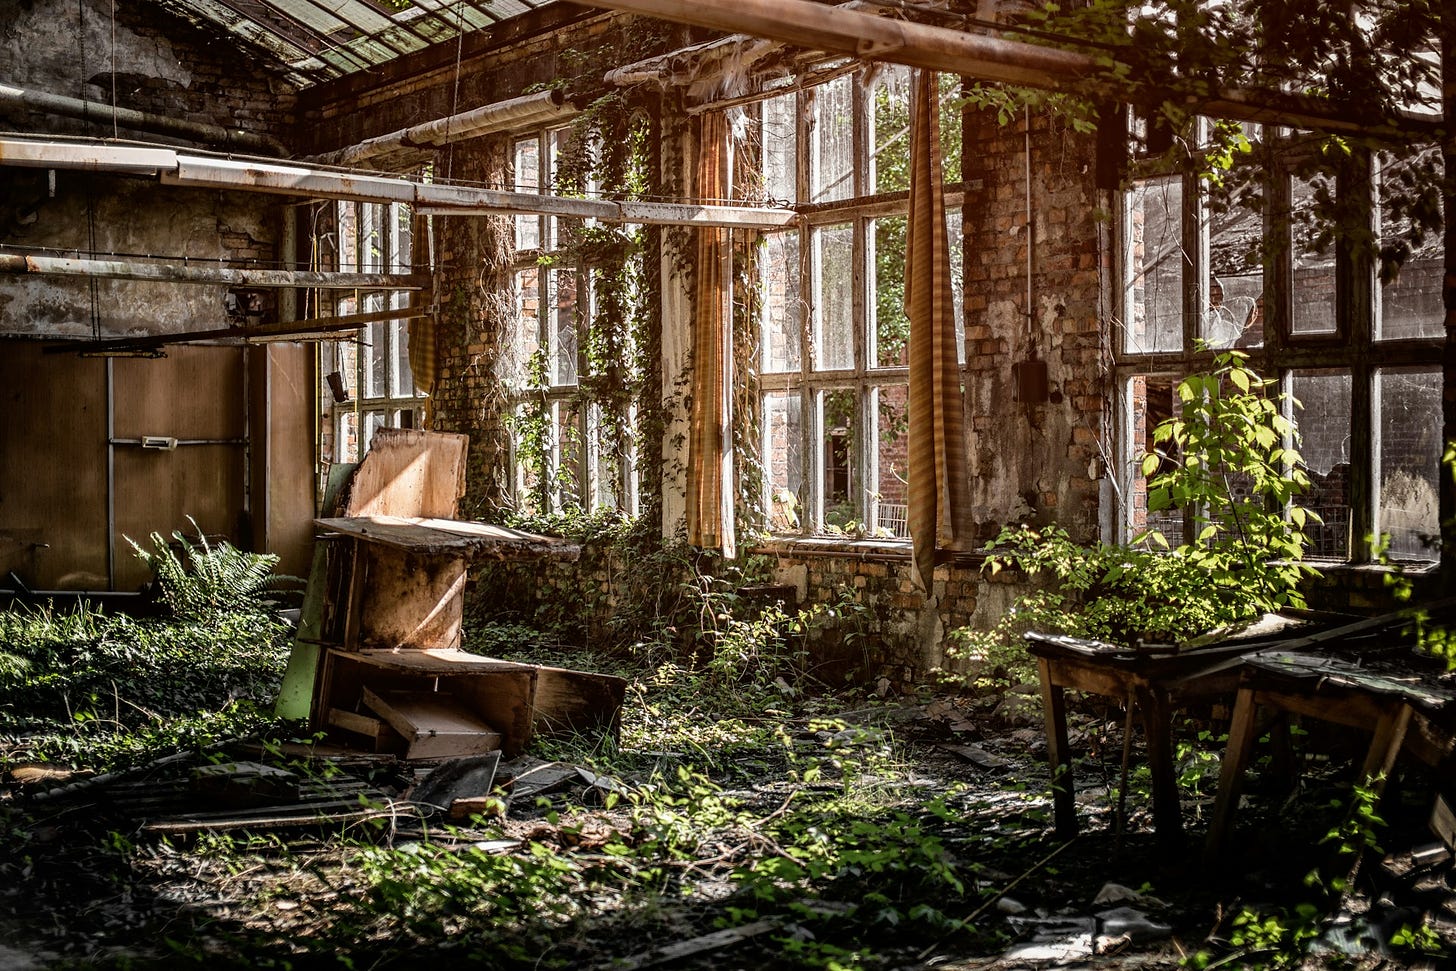 Image is a photo of a large room with enormous multi-paned skylights and windows and scattered furniture. The room is overtaken by ivy, plants, and moss growing everywhere across the floor and up the walls. Sunlight is pouring in through the windows.